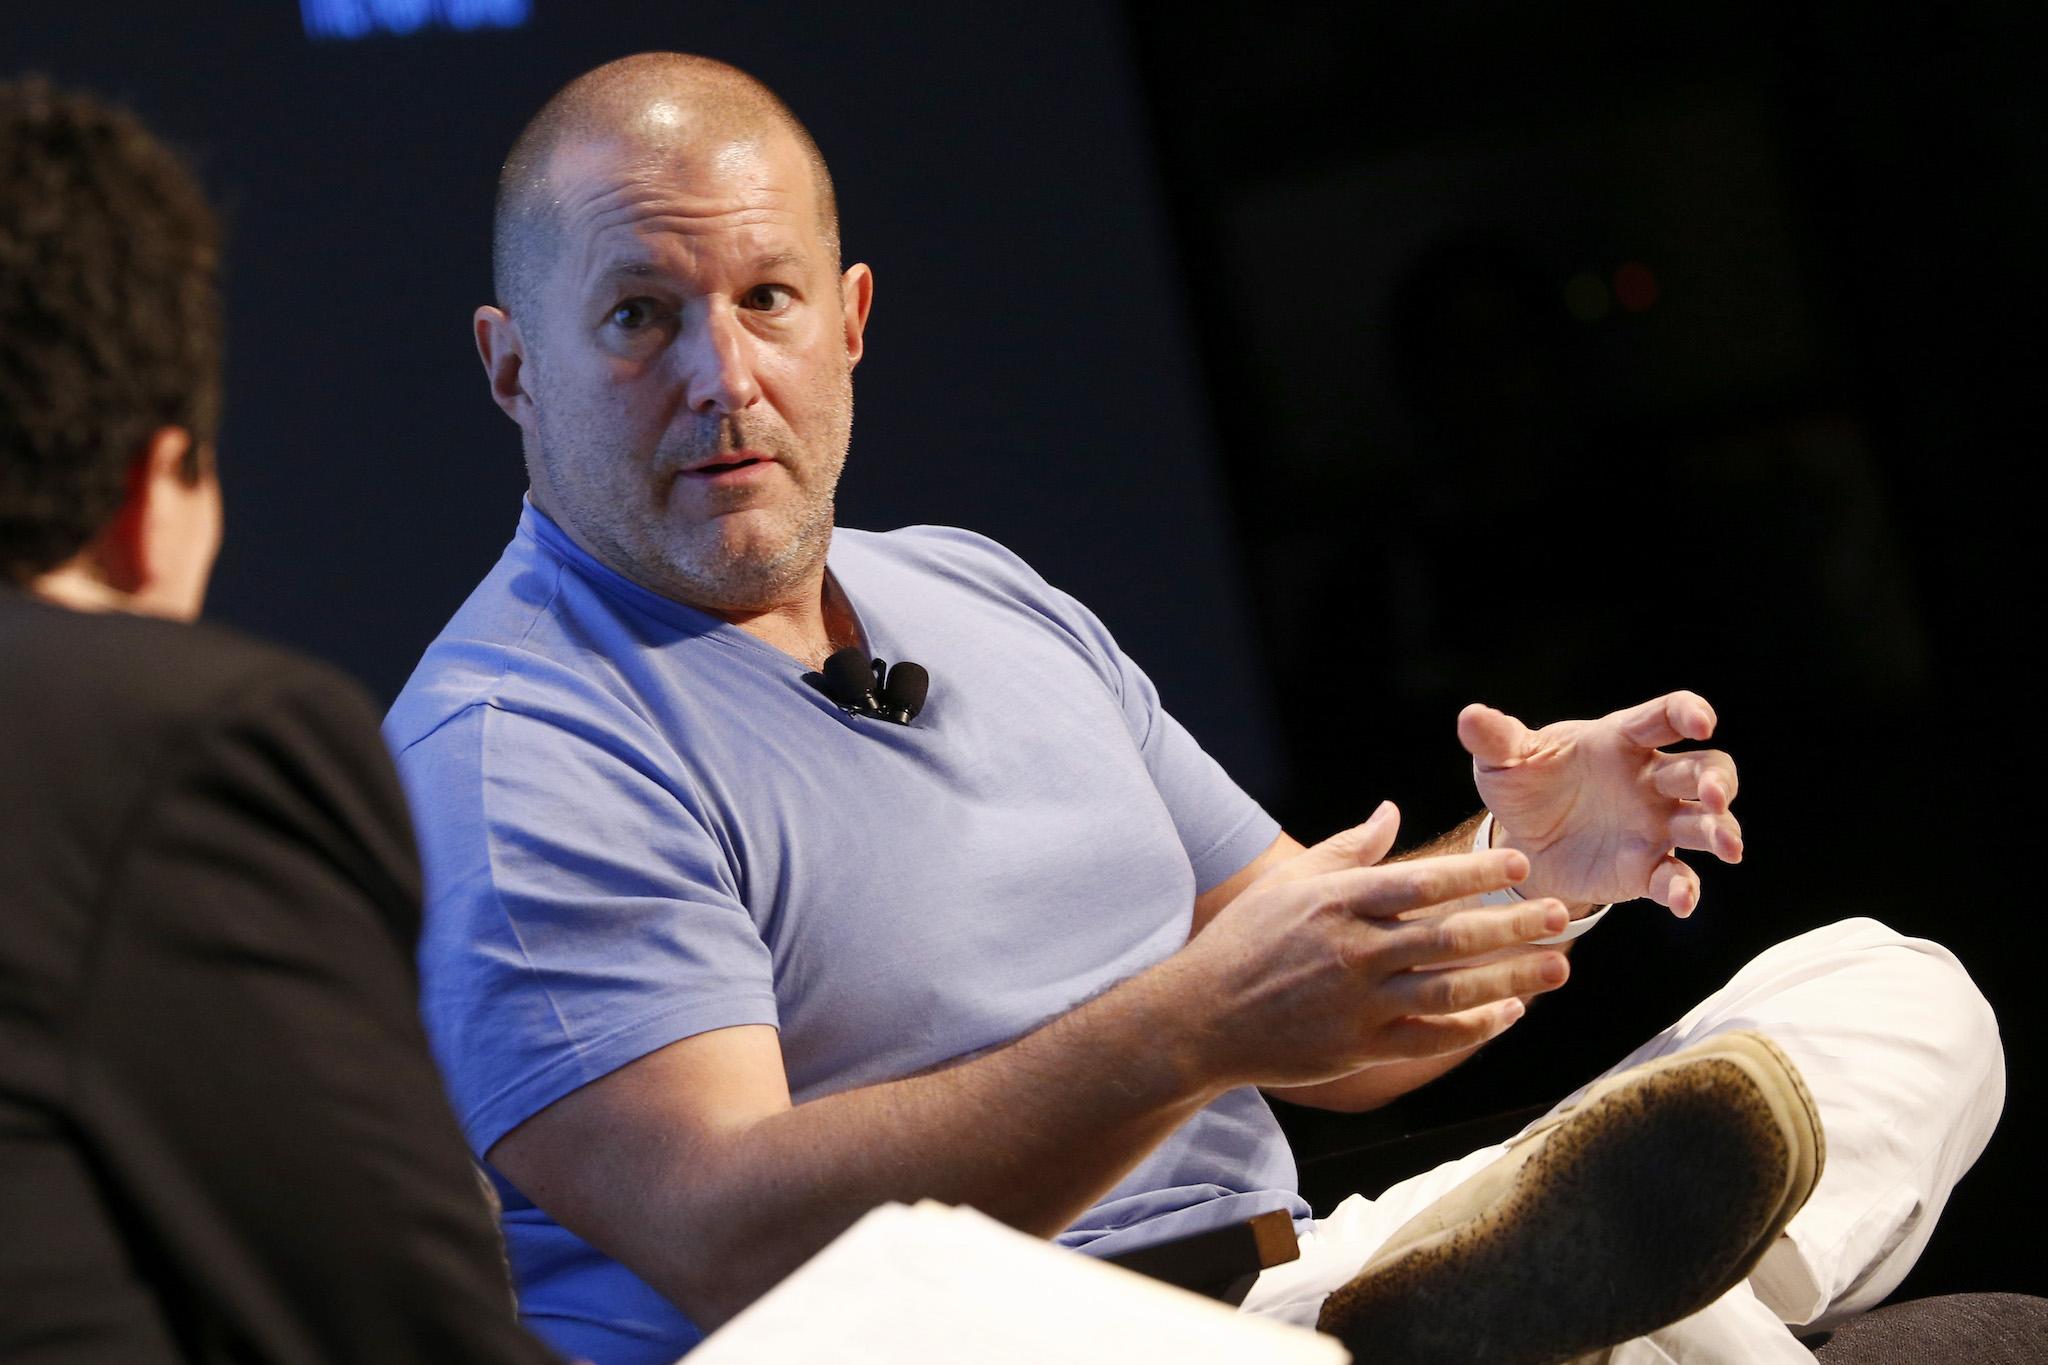 Apple's Chief Design Officer Jony Ive speaks onstage during the 2017 New Yorker TechFest at Cedar Lake on October 6, 2017 in New York City